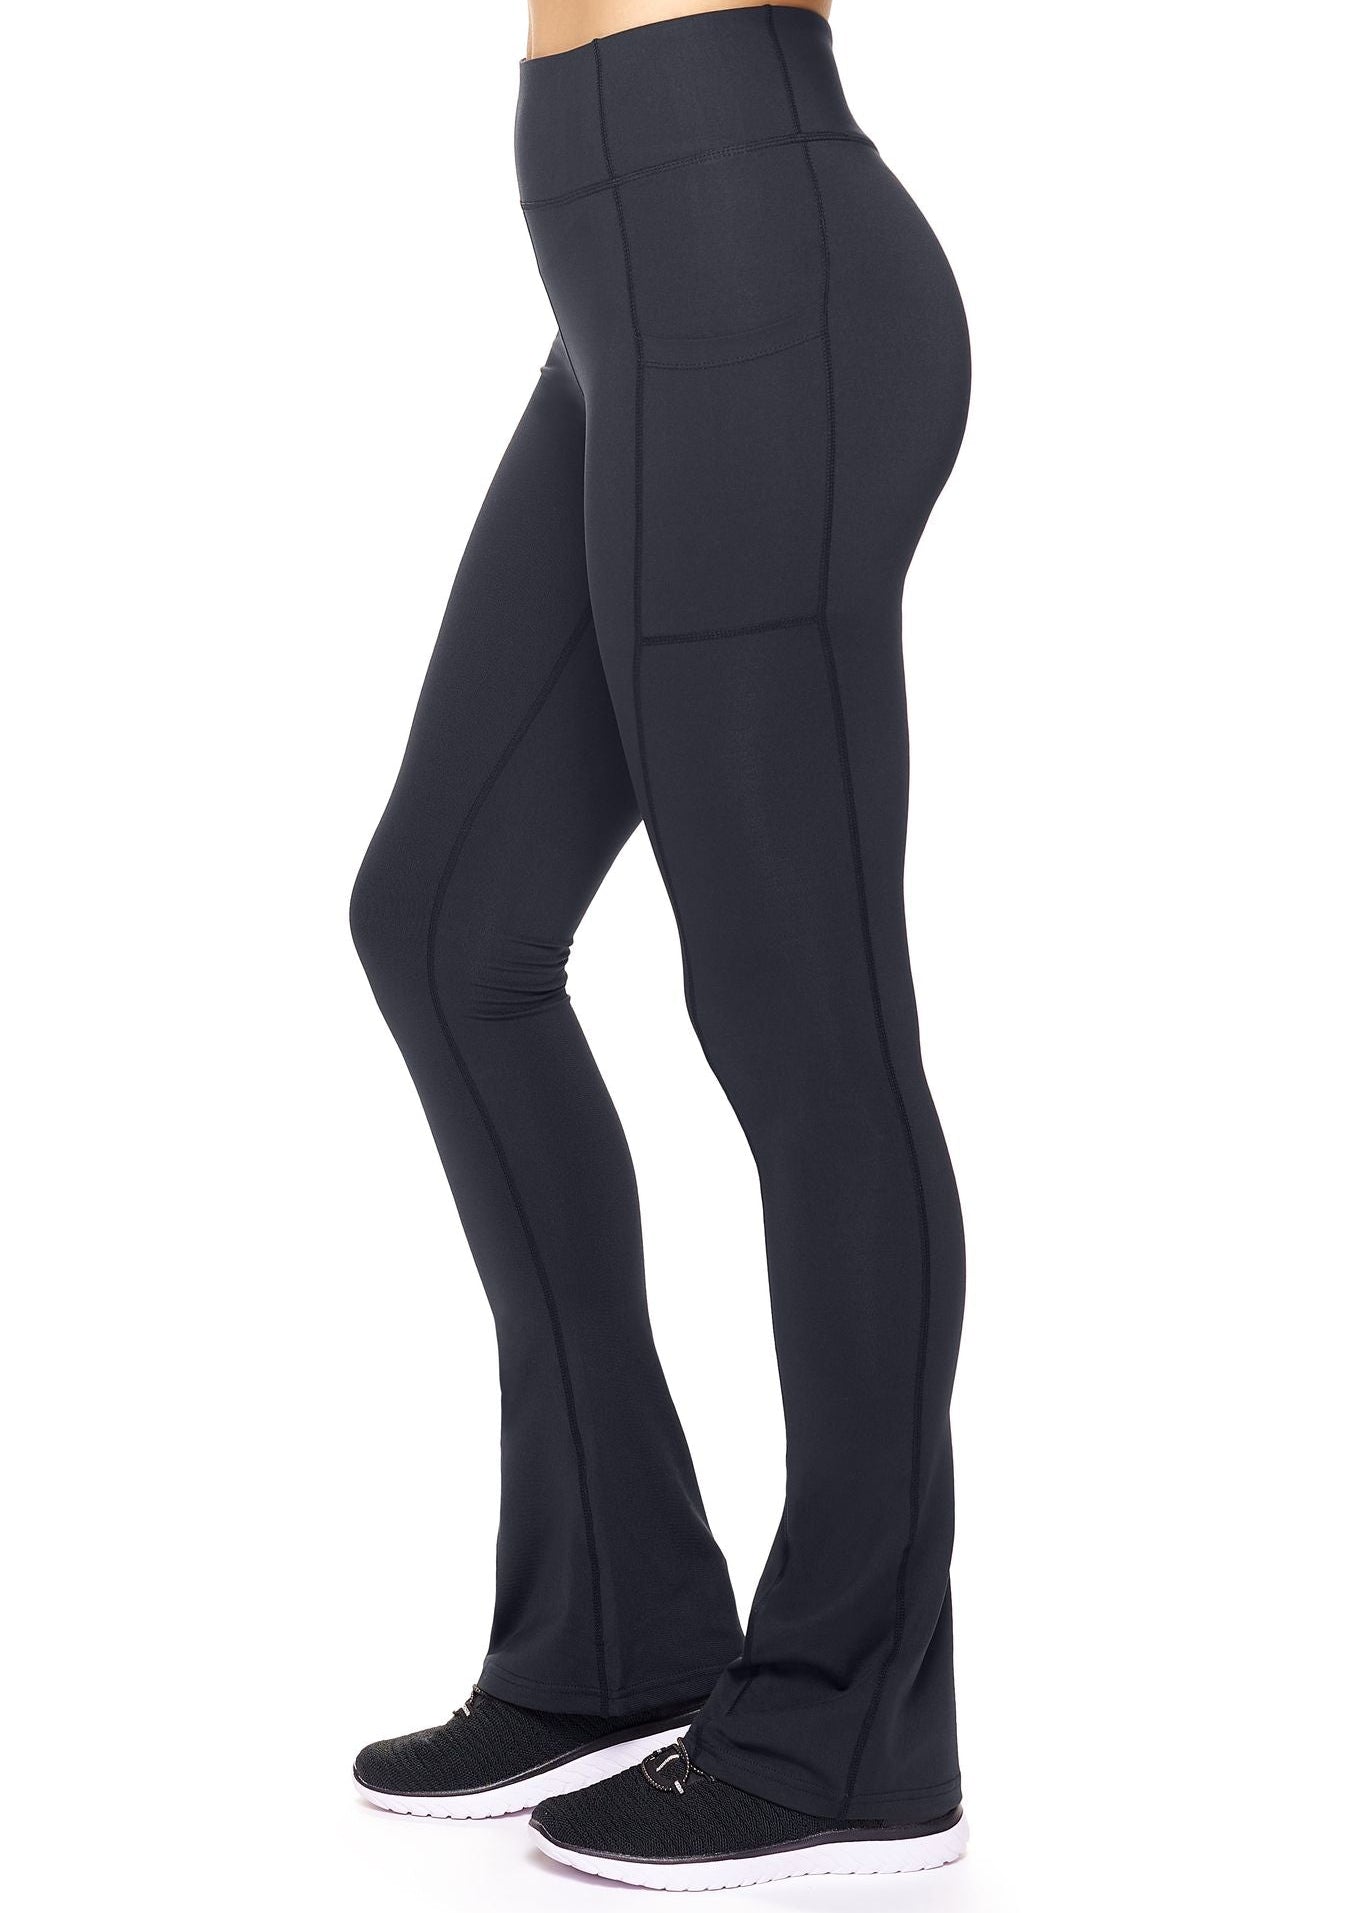 Cat Call Plus Leggings with Pockets